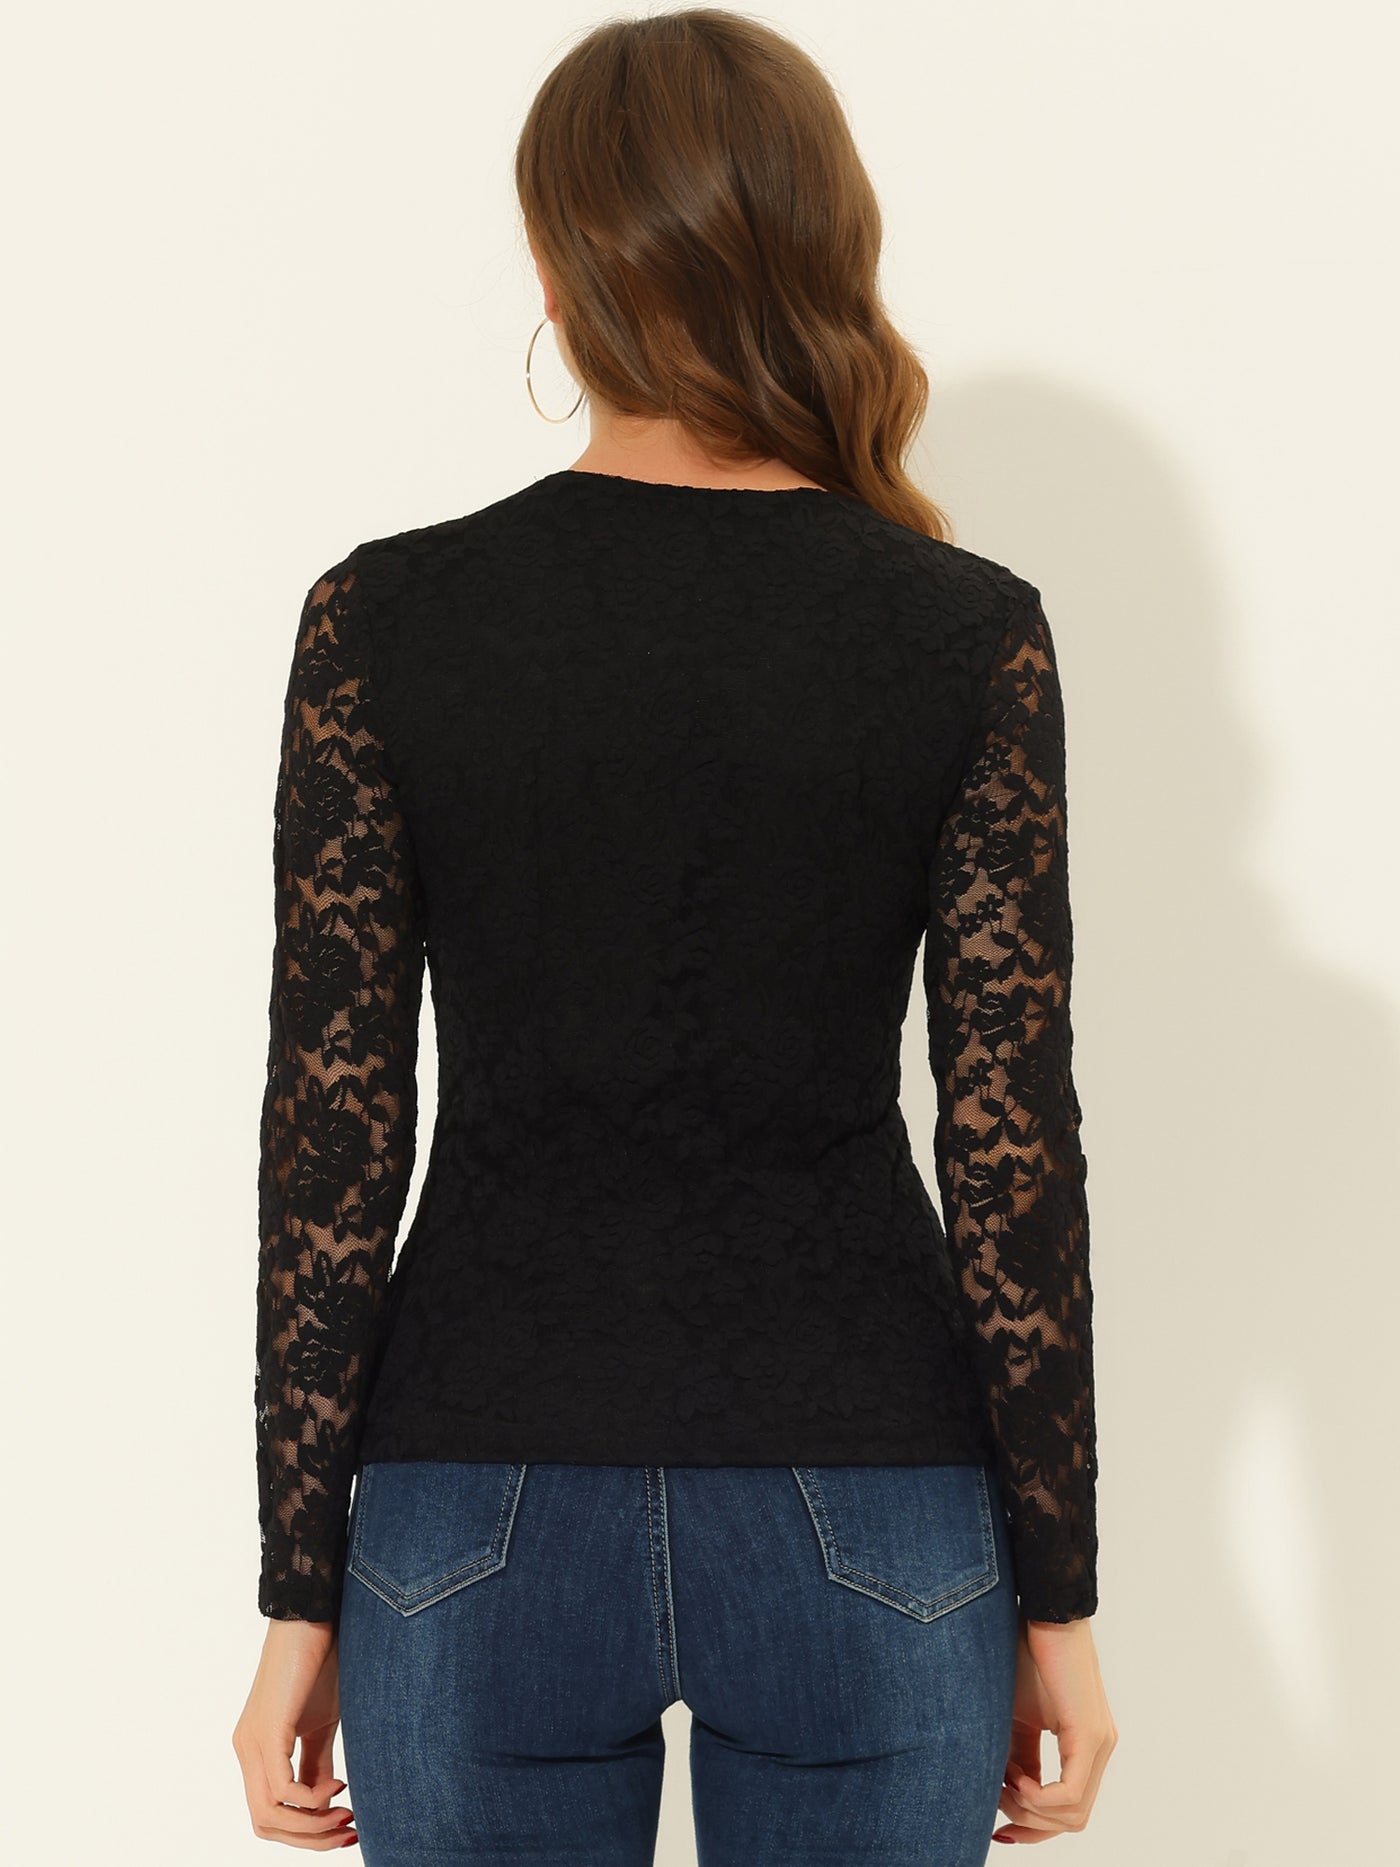 Allegra K Lace Top V Neck Floral Embroidery Long Sleeve Sheer Blouse